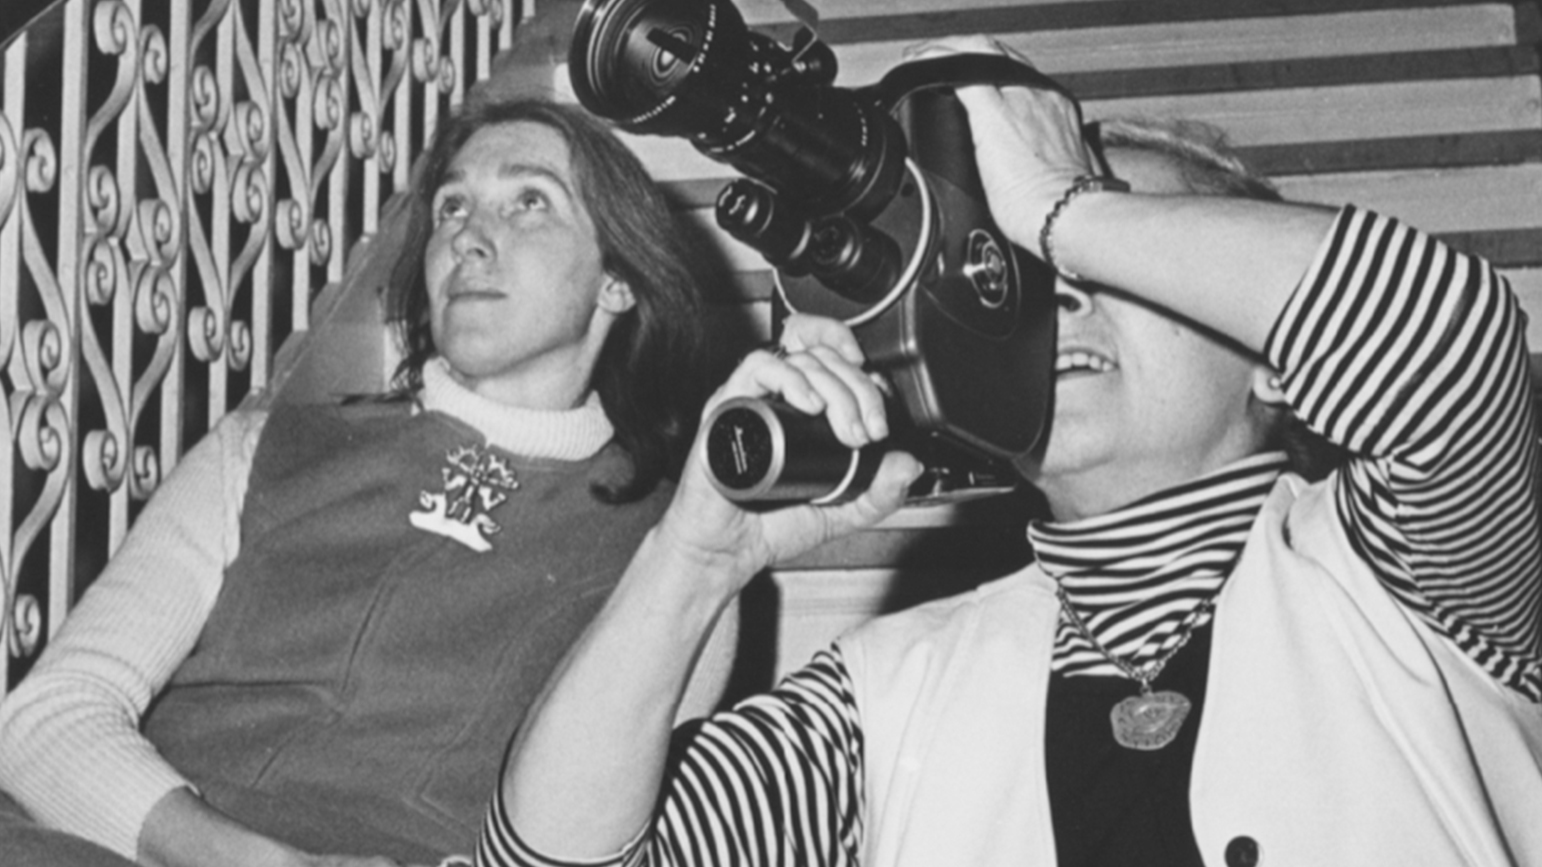 Black and white photograph of two women seated, one looking through a video camera